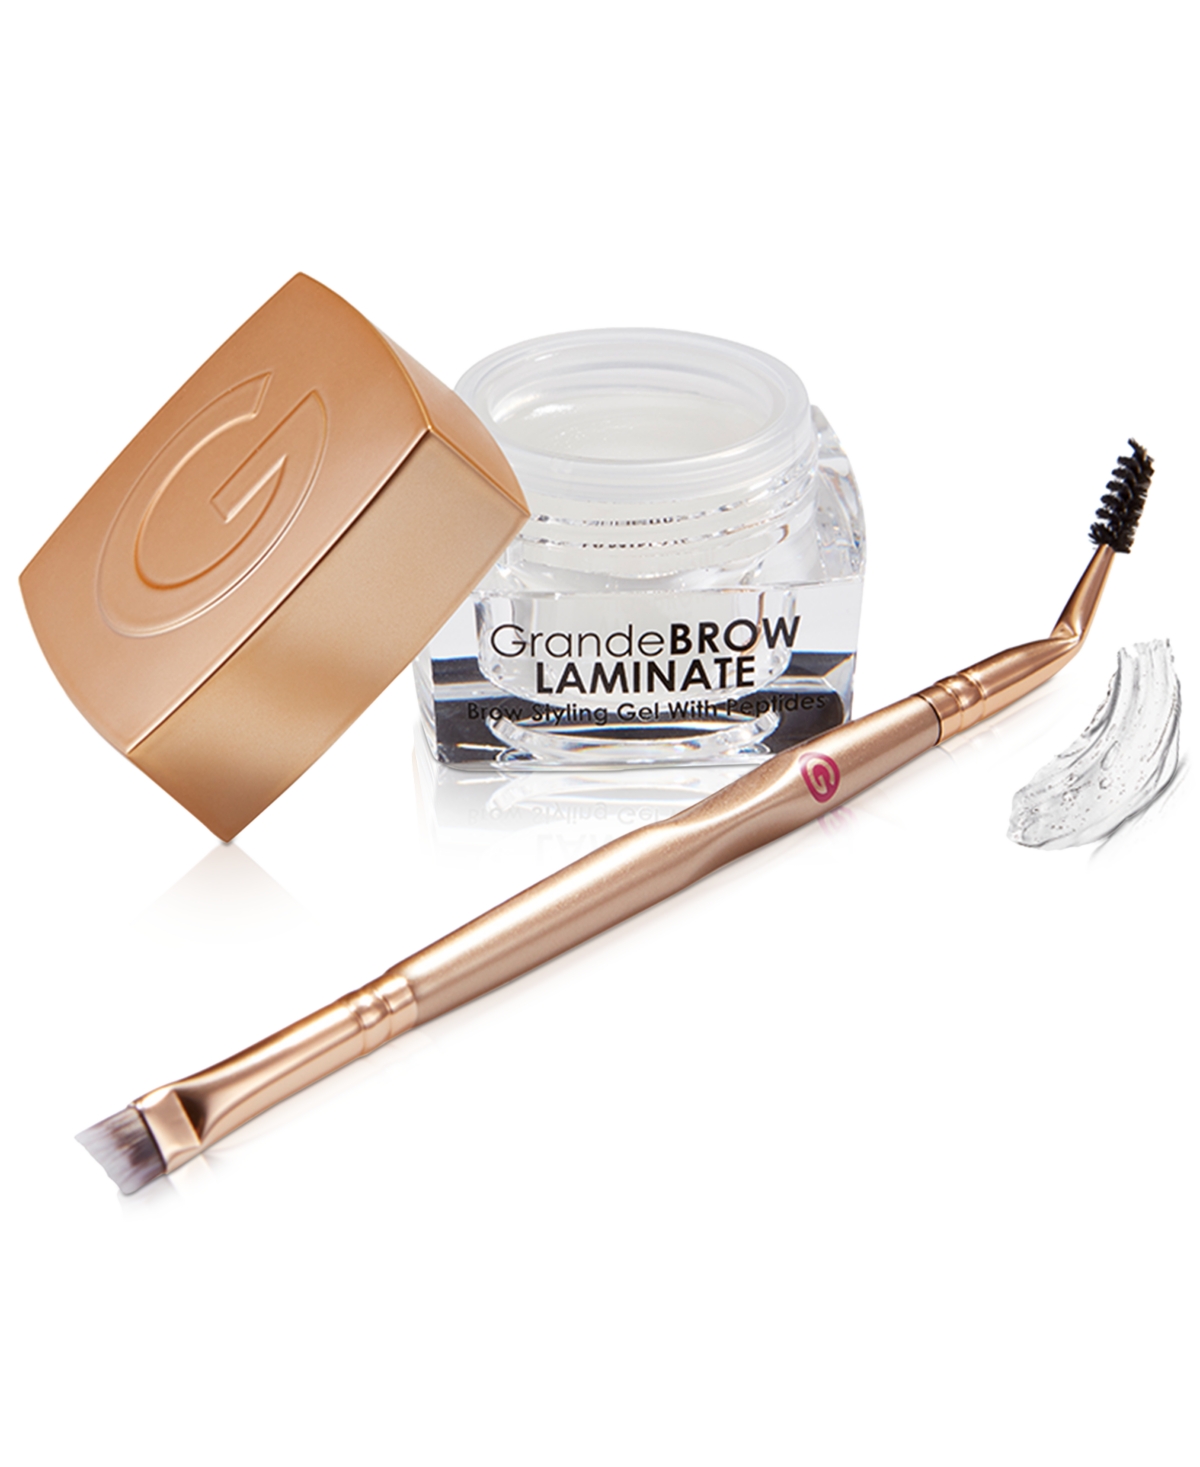 GrandeBROW-laminate Brow Styling Gel - Clear